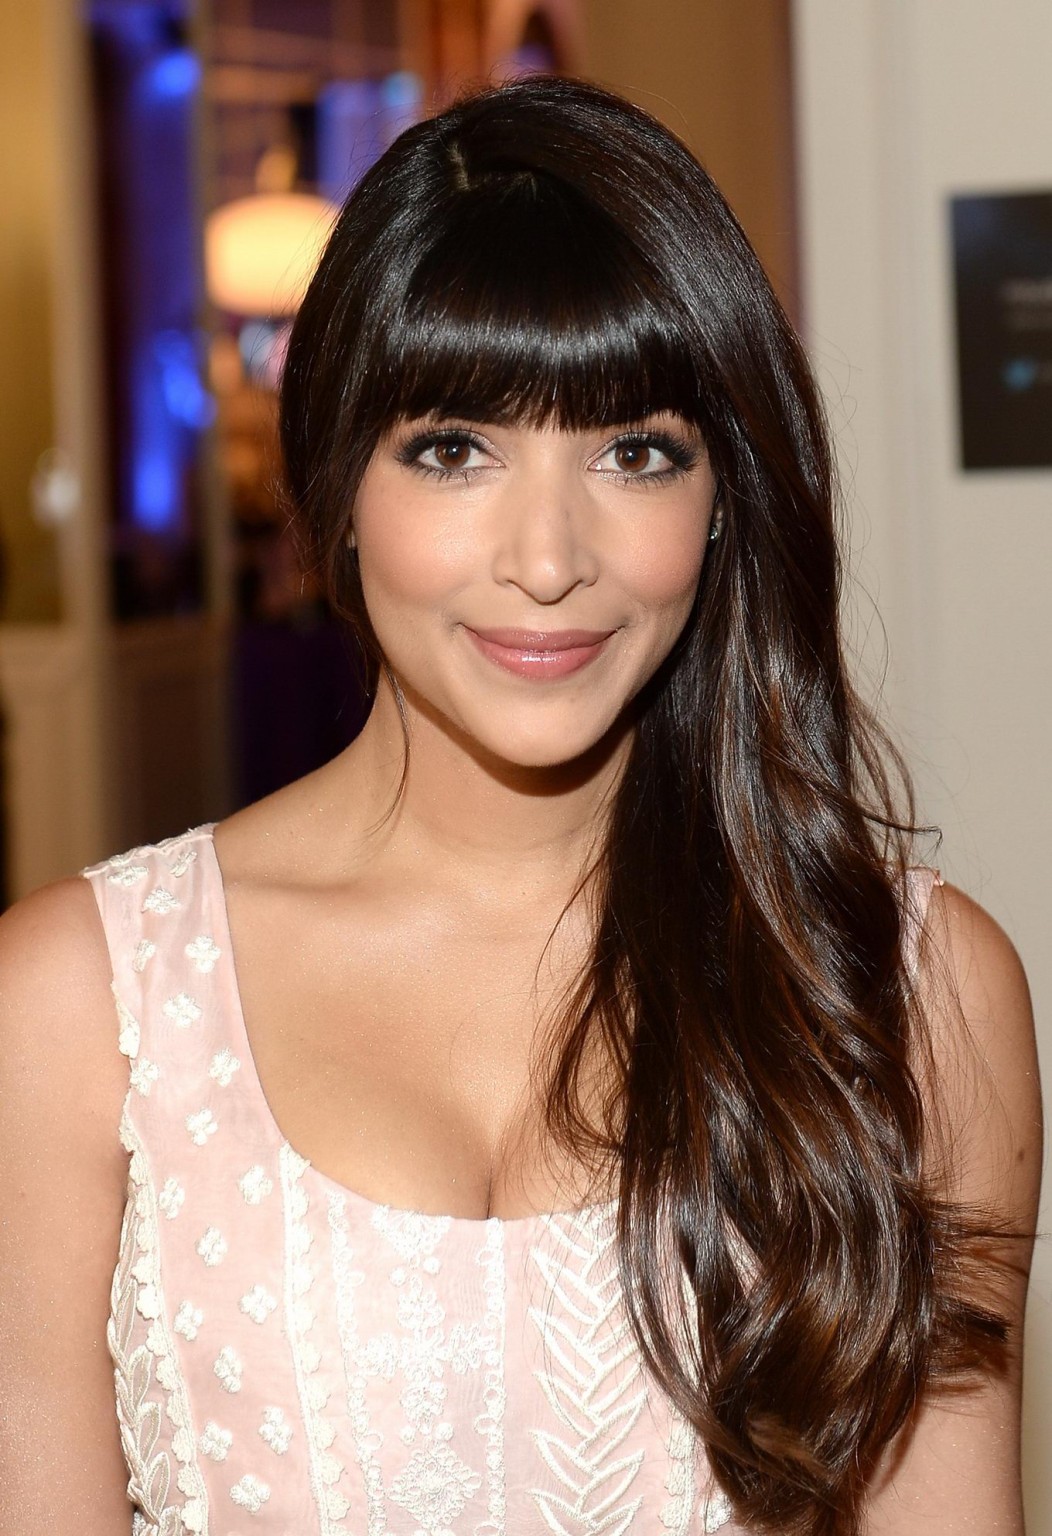 Hannah Simone showing cleavage at the Variety's 5th Annual Power of Women event  #75216748